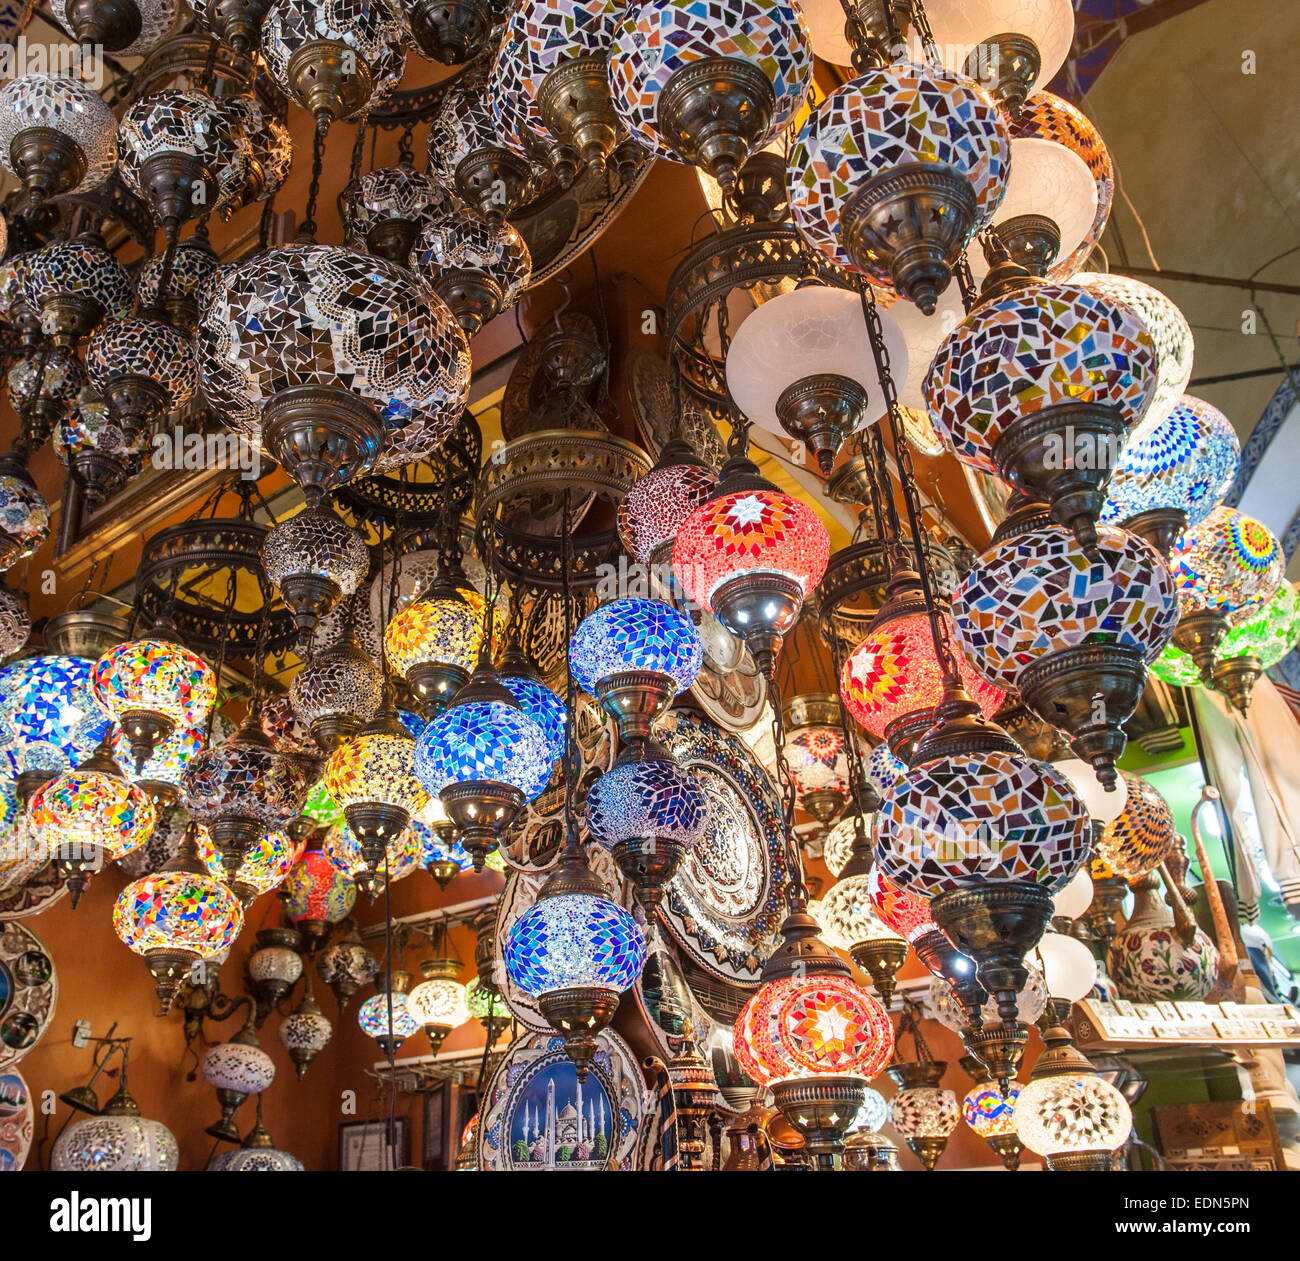 Ornate glass ceiling lights hanging at a bazaar market souk stall Stock Photo